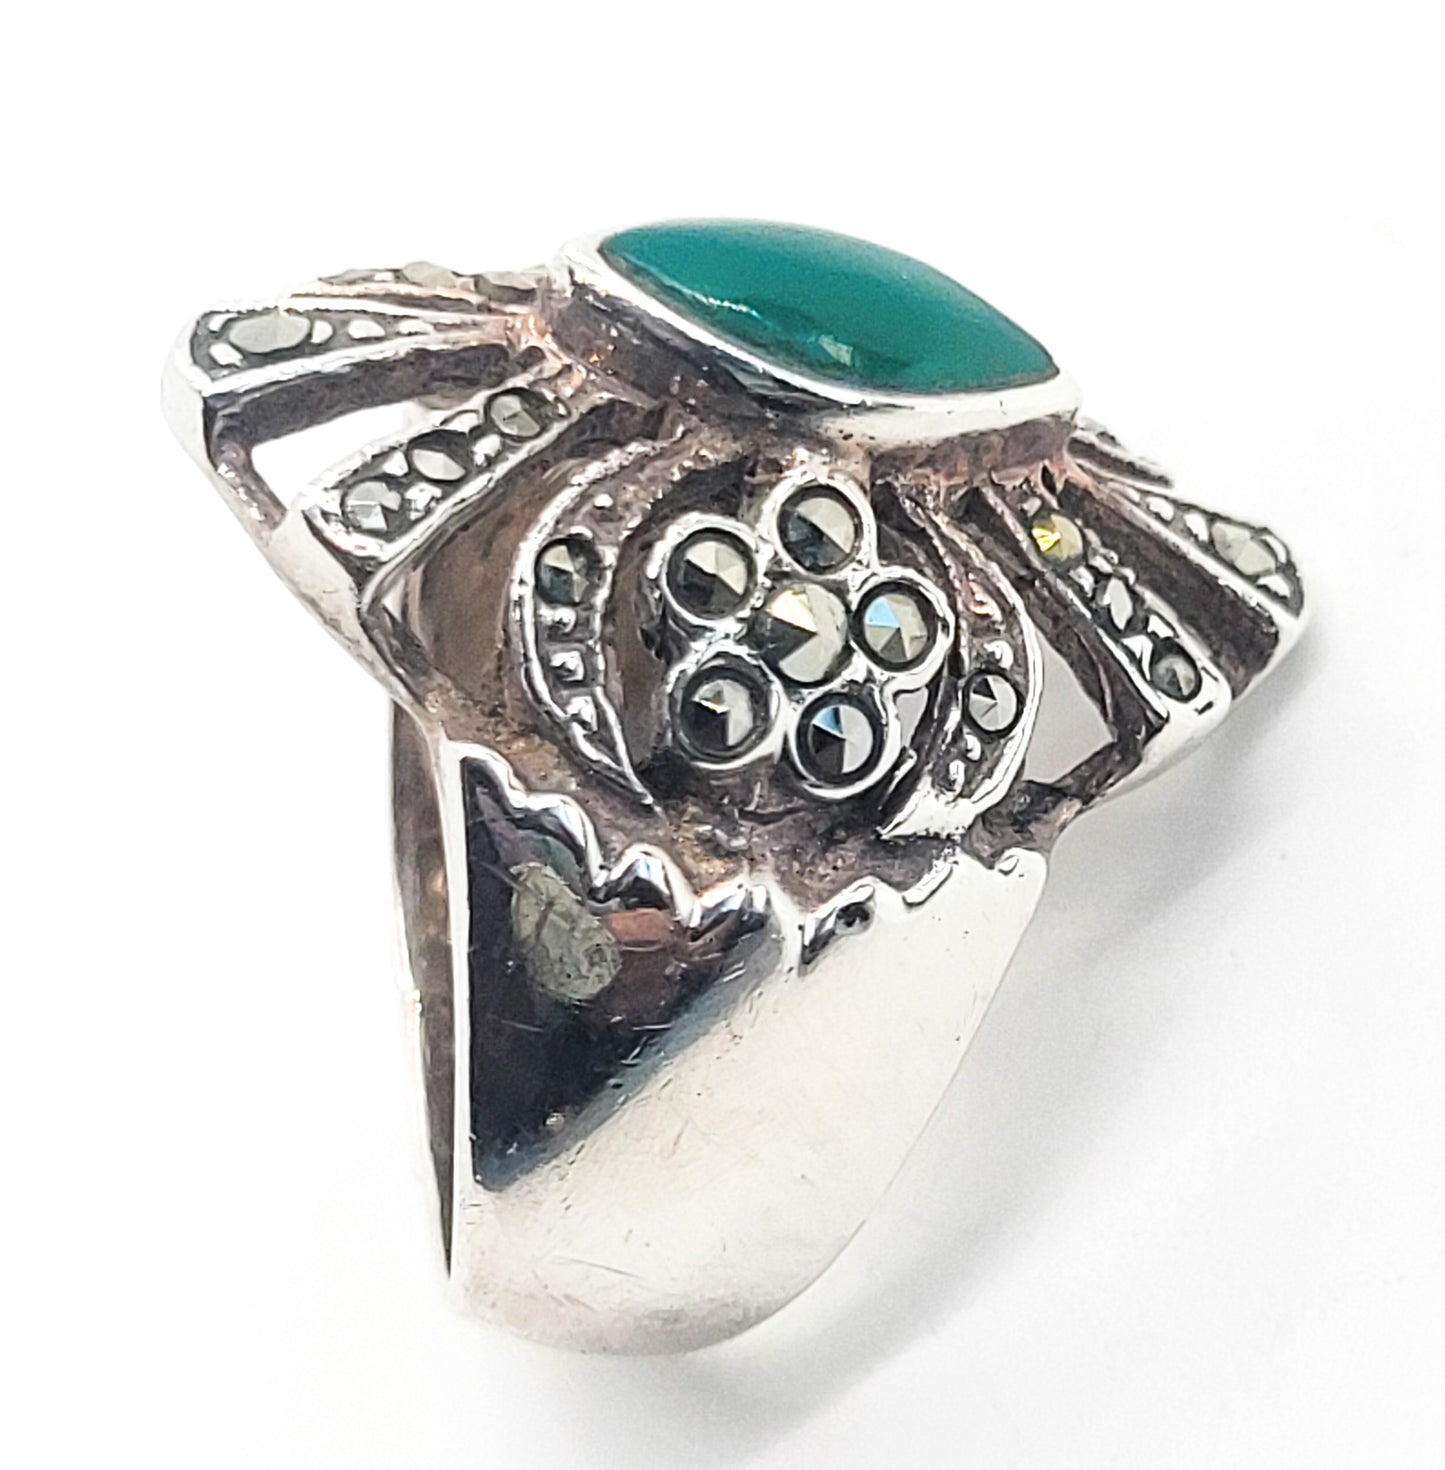 NF Green Chrysoprase and marcasite sterling silver retro vintage ring size 6.5